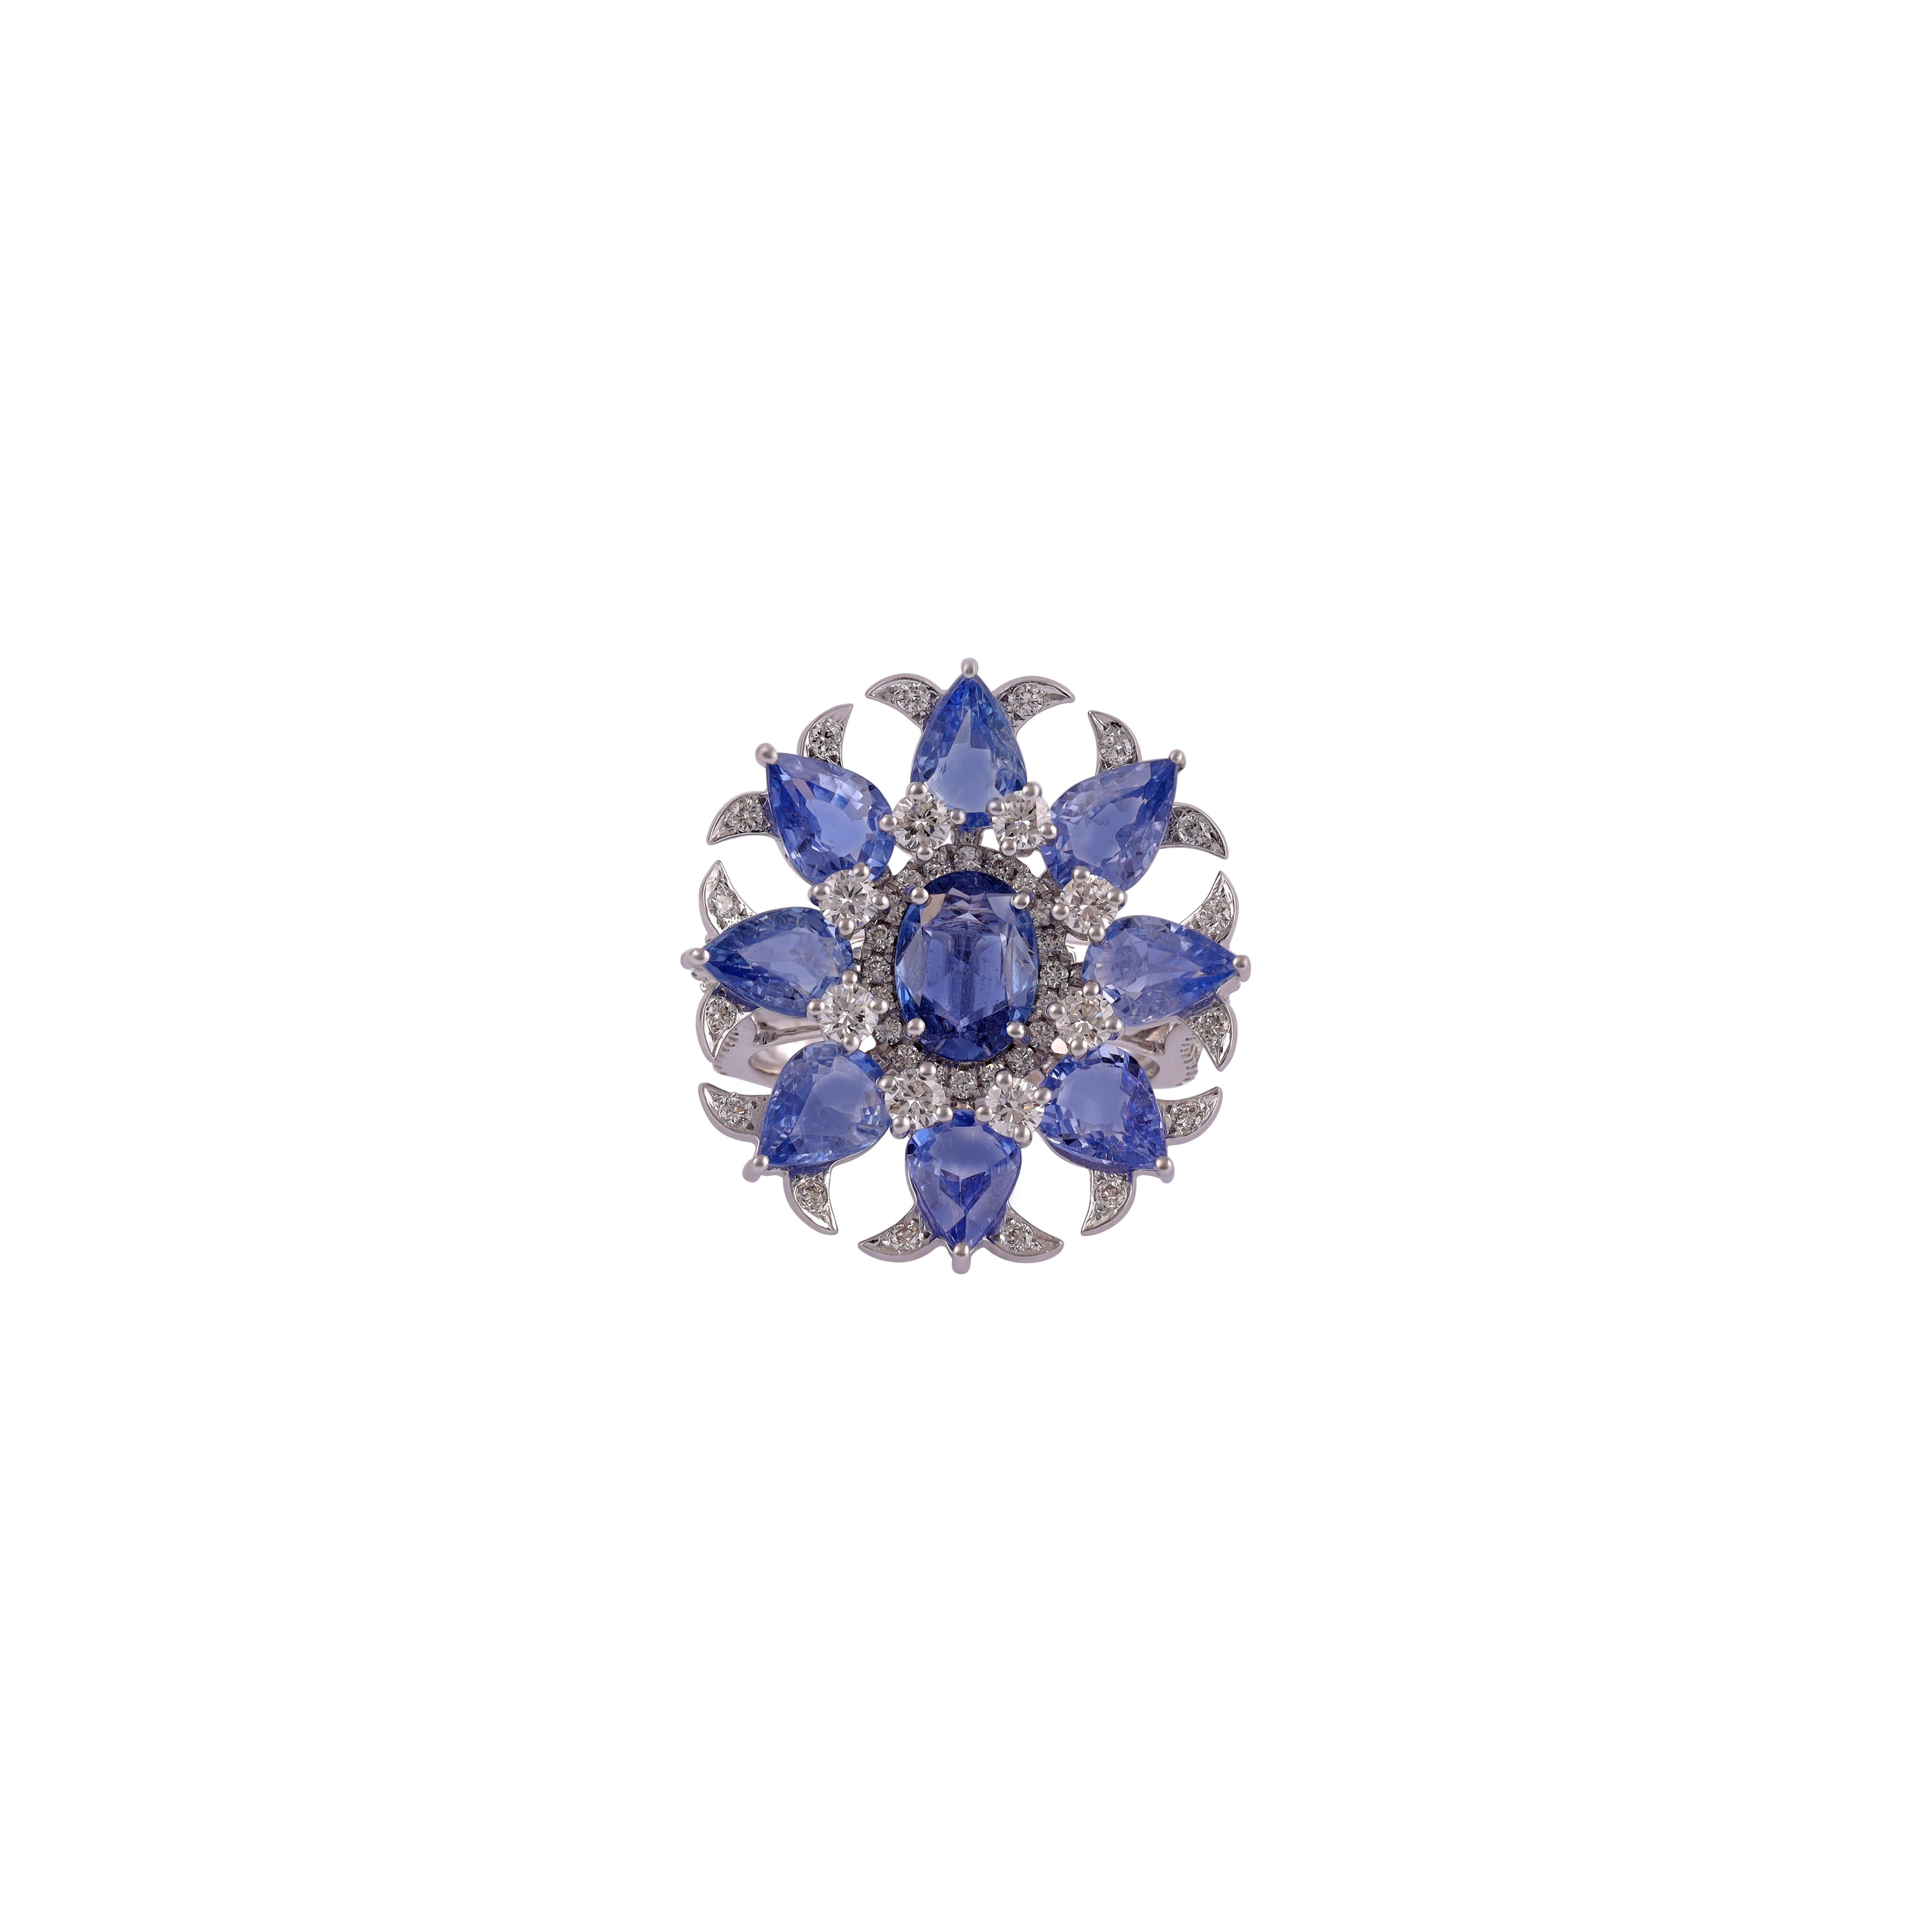 Flower Design Sapphire ring Studded with Diamond in 18k White Gold
1 Oval and 8 Pear shape Blue Sapphire in  7.35 CTS
110 Brilliant cut Diamond 1.31 CTS
Round Diamond 0.25 carat
18K White Gold 6.91 grams

Custom Services
Resizing is